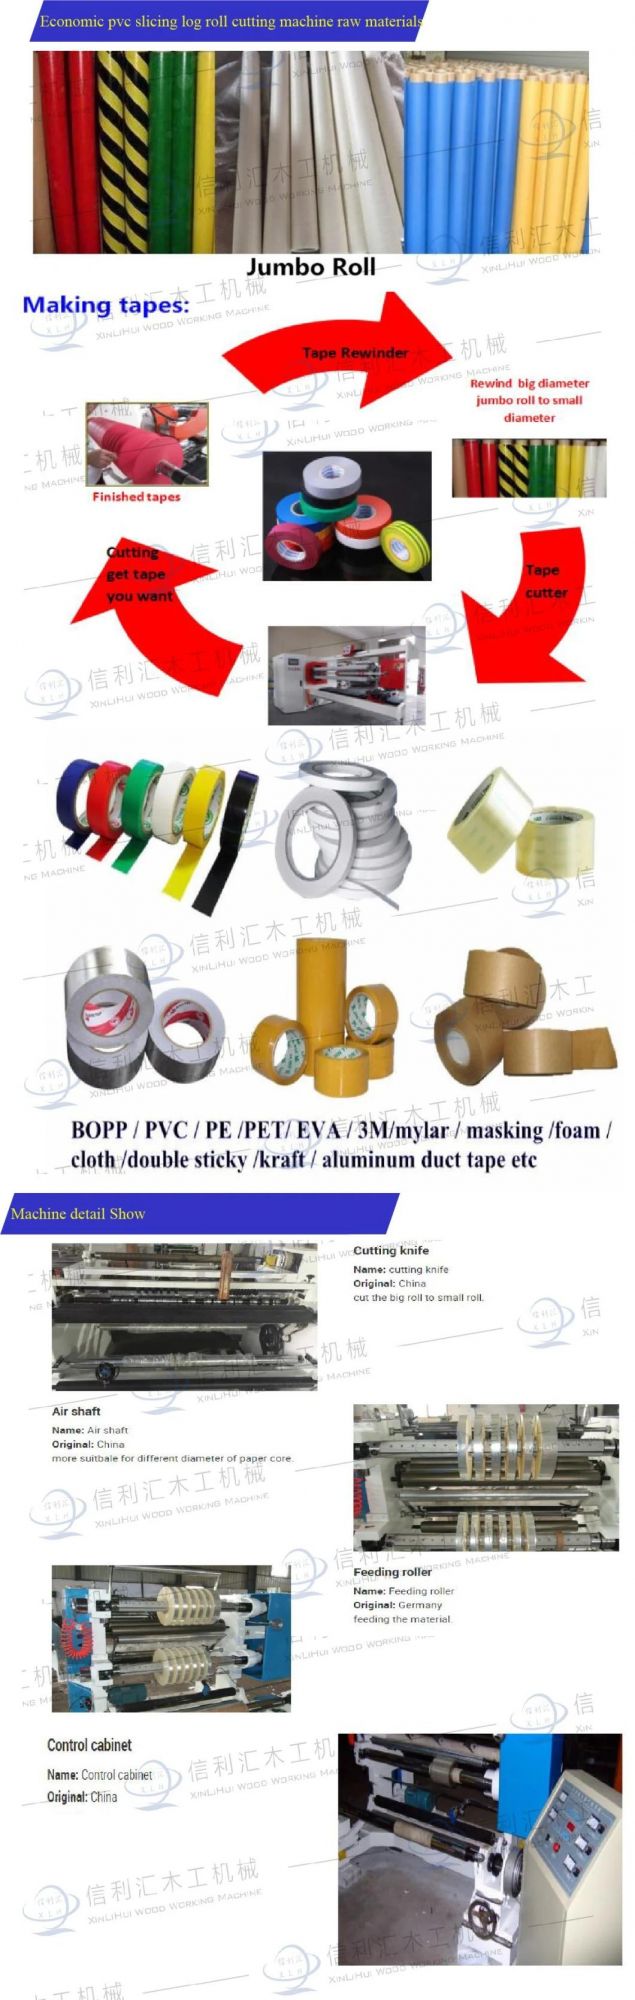 Wood Grained Paper Slitting- Machine/ Aluminum Foil Tape Slitting Machine/ Wrapping Paper Roll Adhesive Tape Slitter/ Laminating Machine and Slitter Rewinder